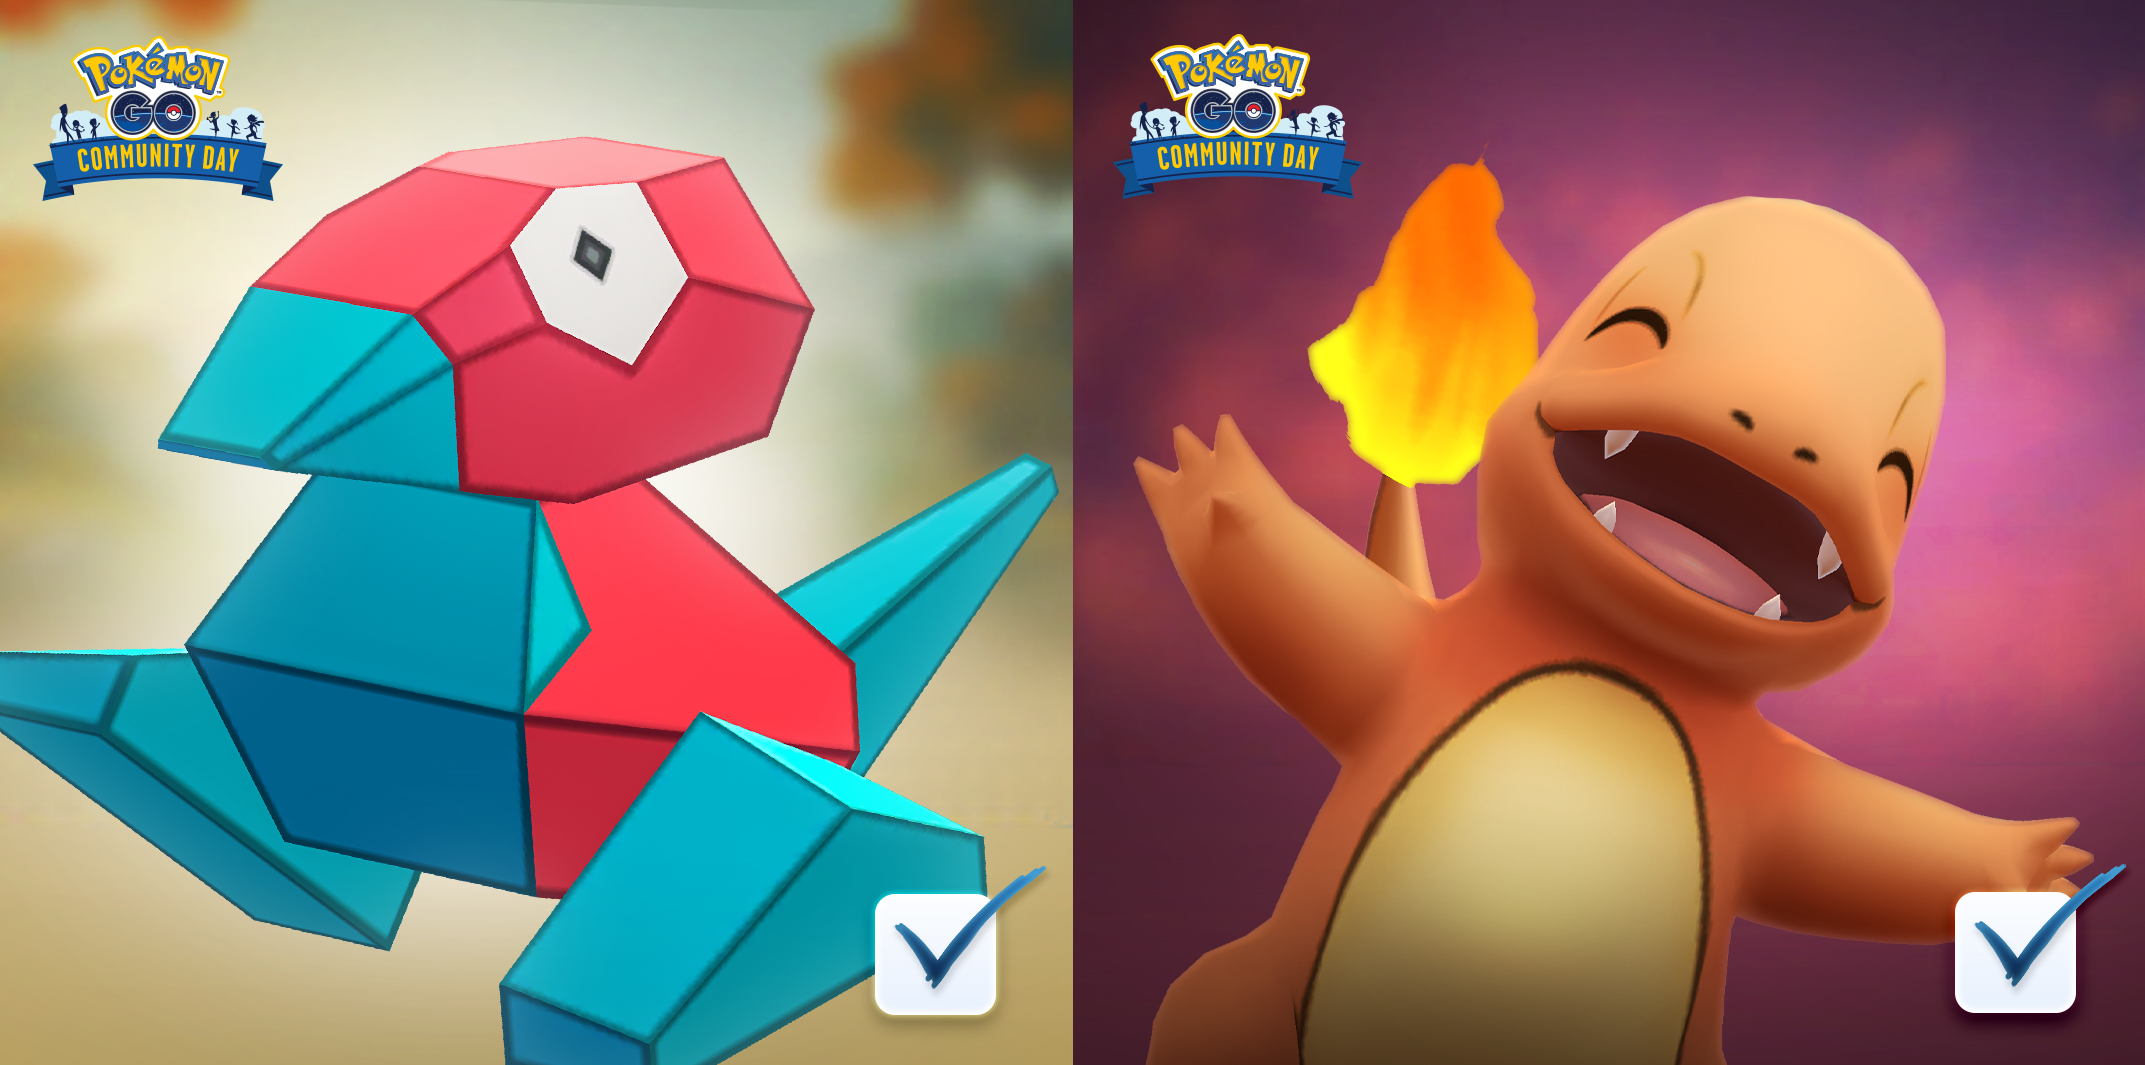 Pokemon GO Sept. 2020 Community Day to feature Porygon, Oct. 2020 to